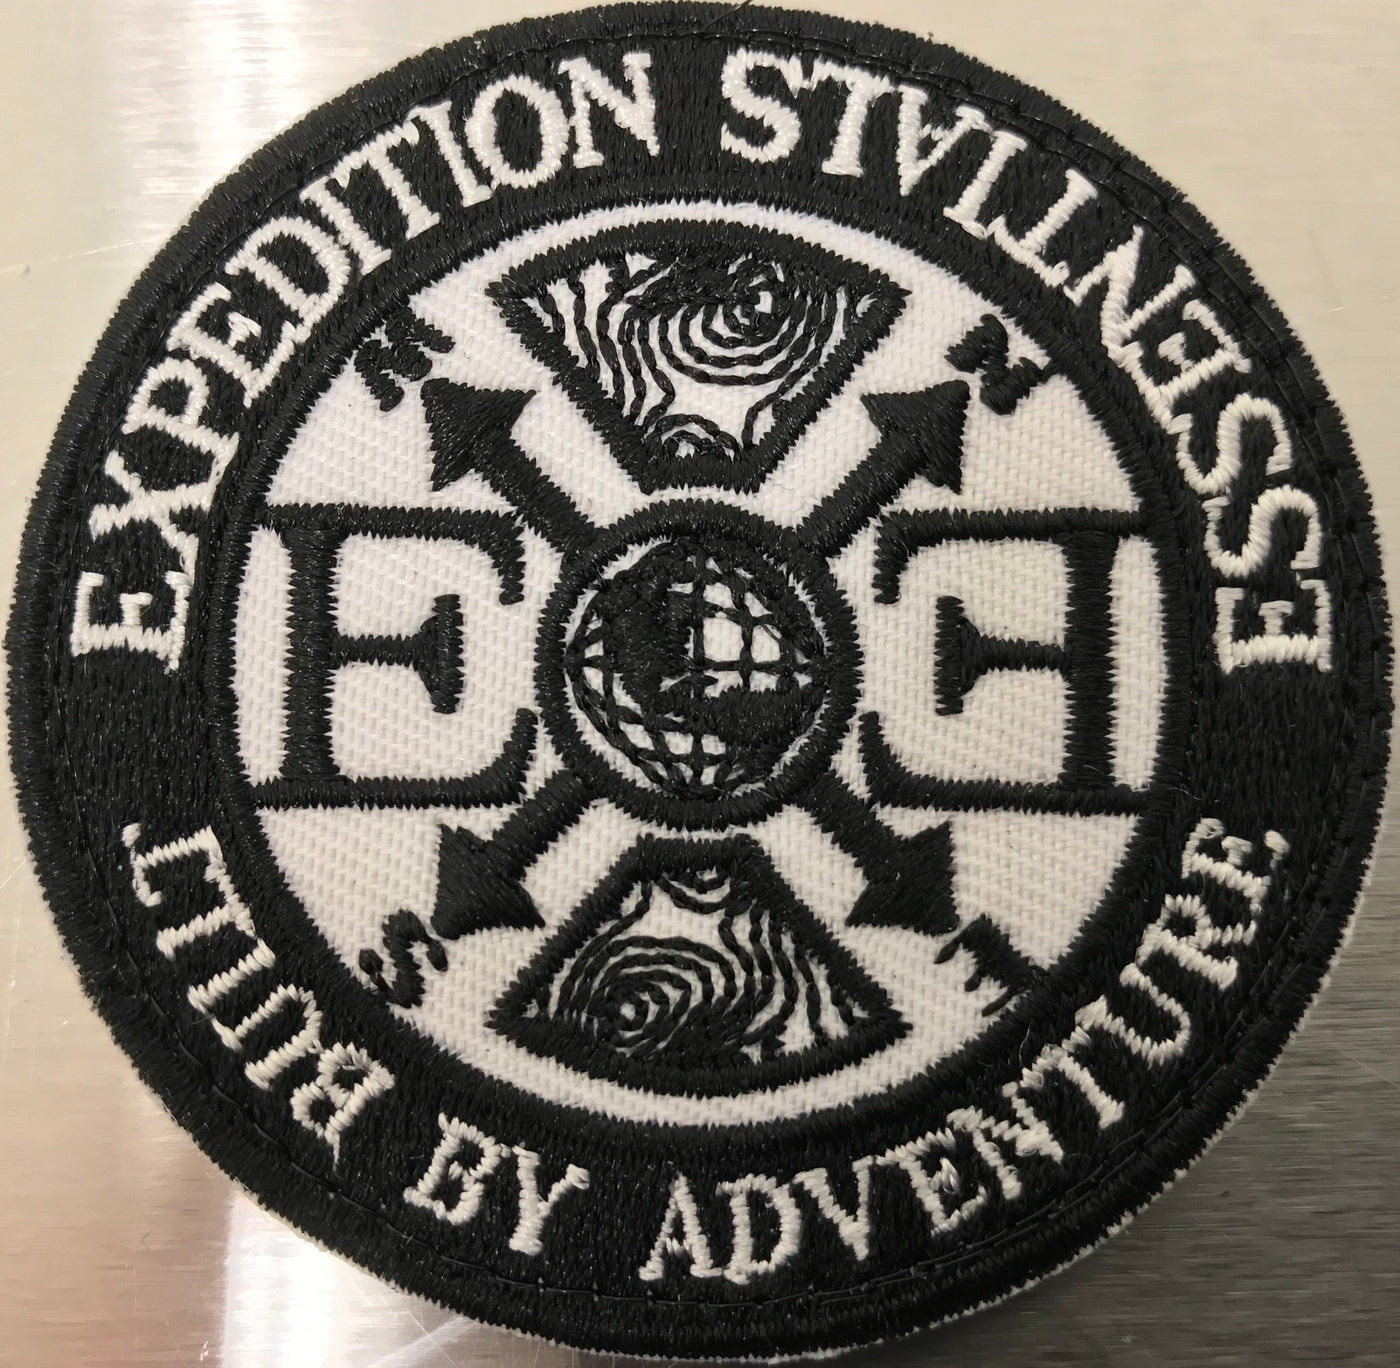 YL Logo Expeditions Sticker